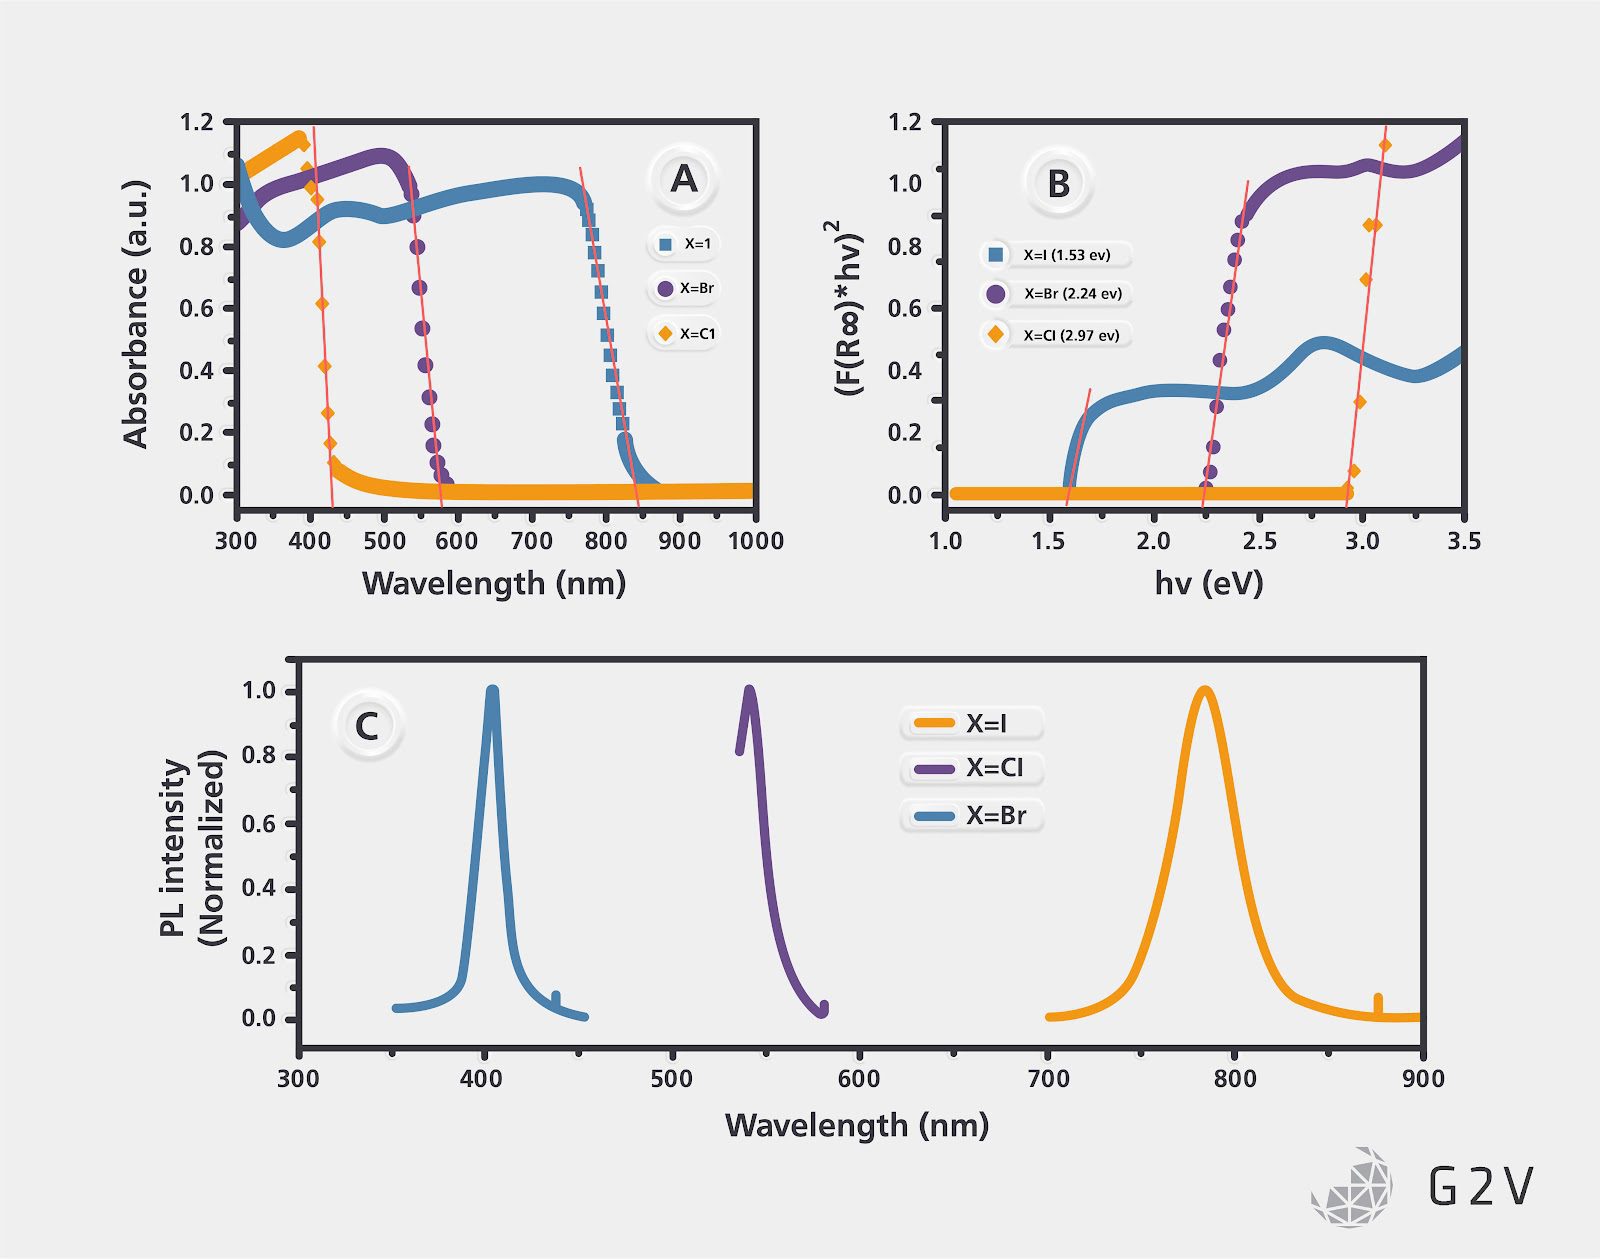 Example of how absorption spectrum and band gap shifts with different halides in perovskite solar cells.